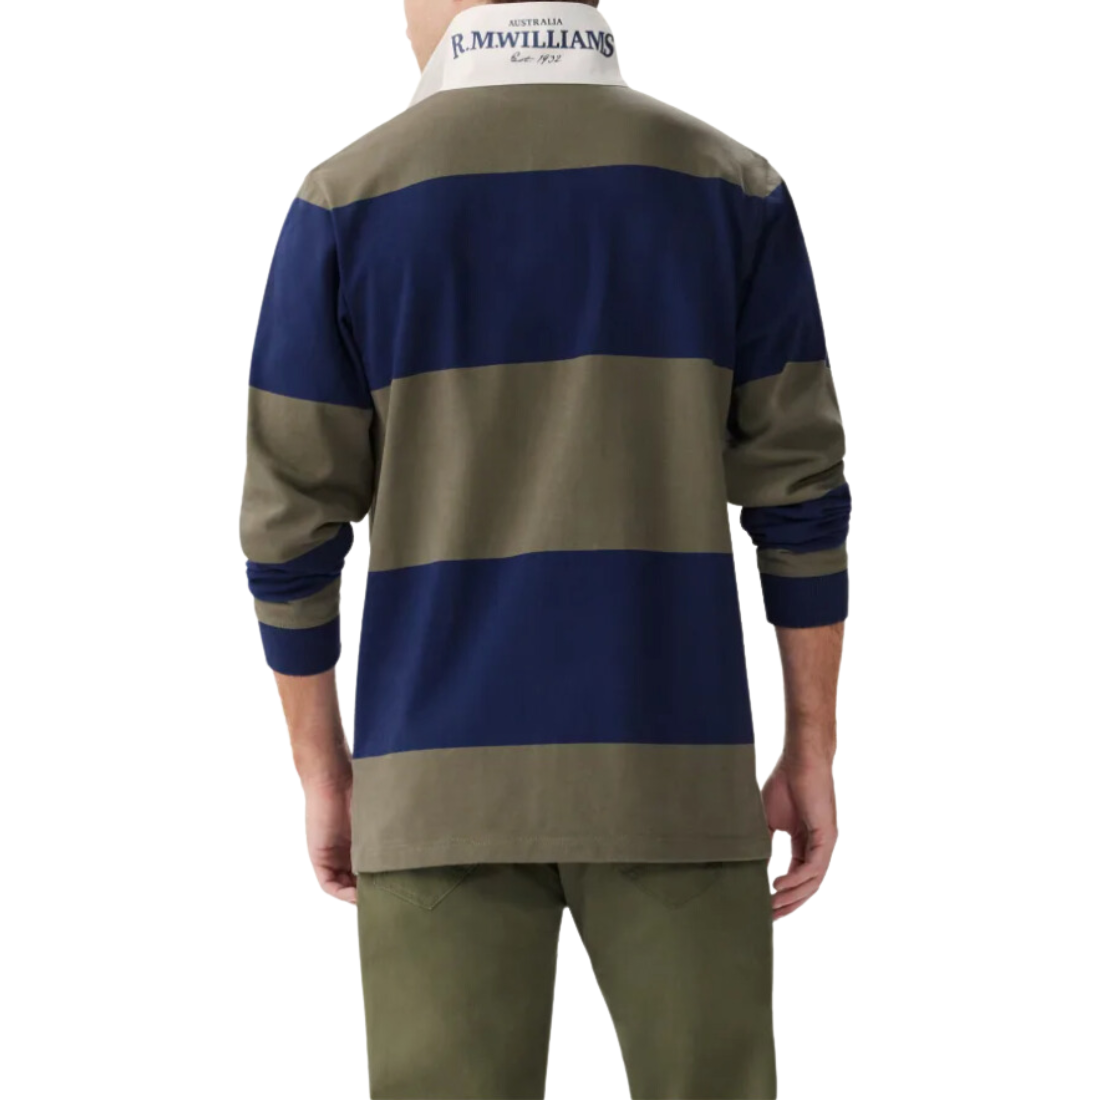 Tweedale Rugby Jumper in Navy and Green at The Bloke Shop, RM Willams Shop Adelaide, 